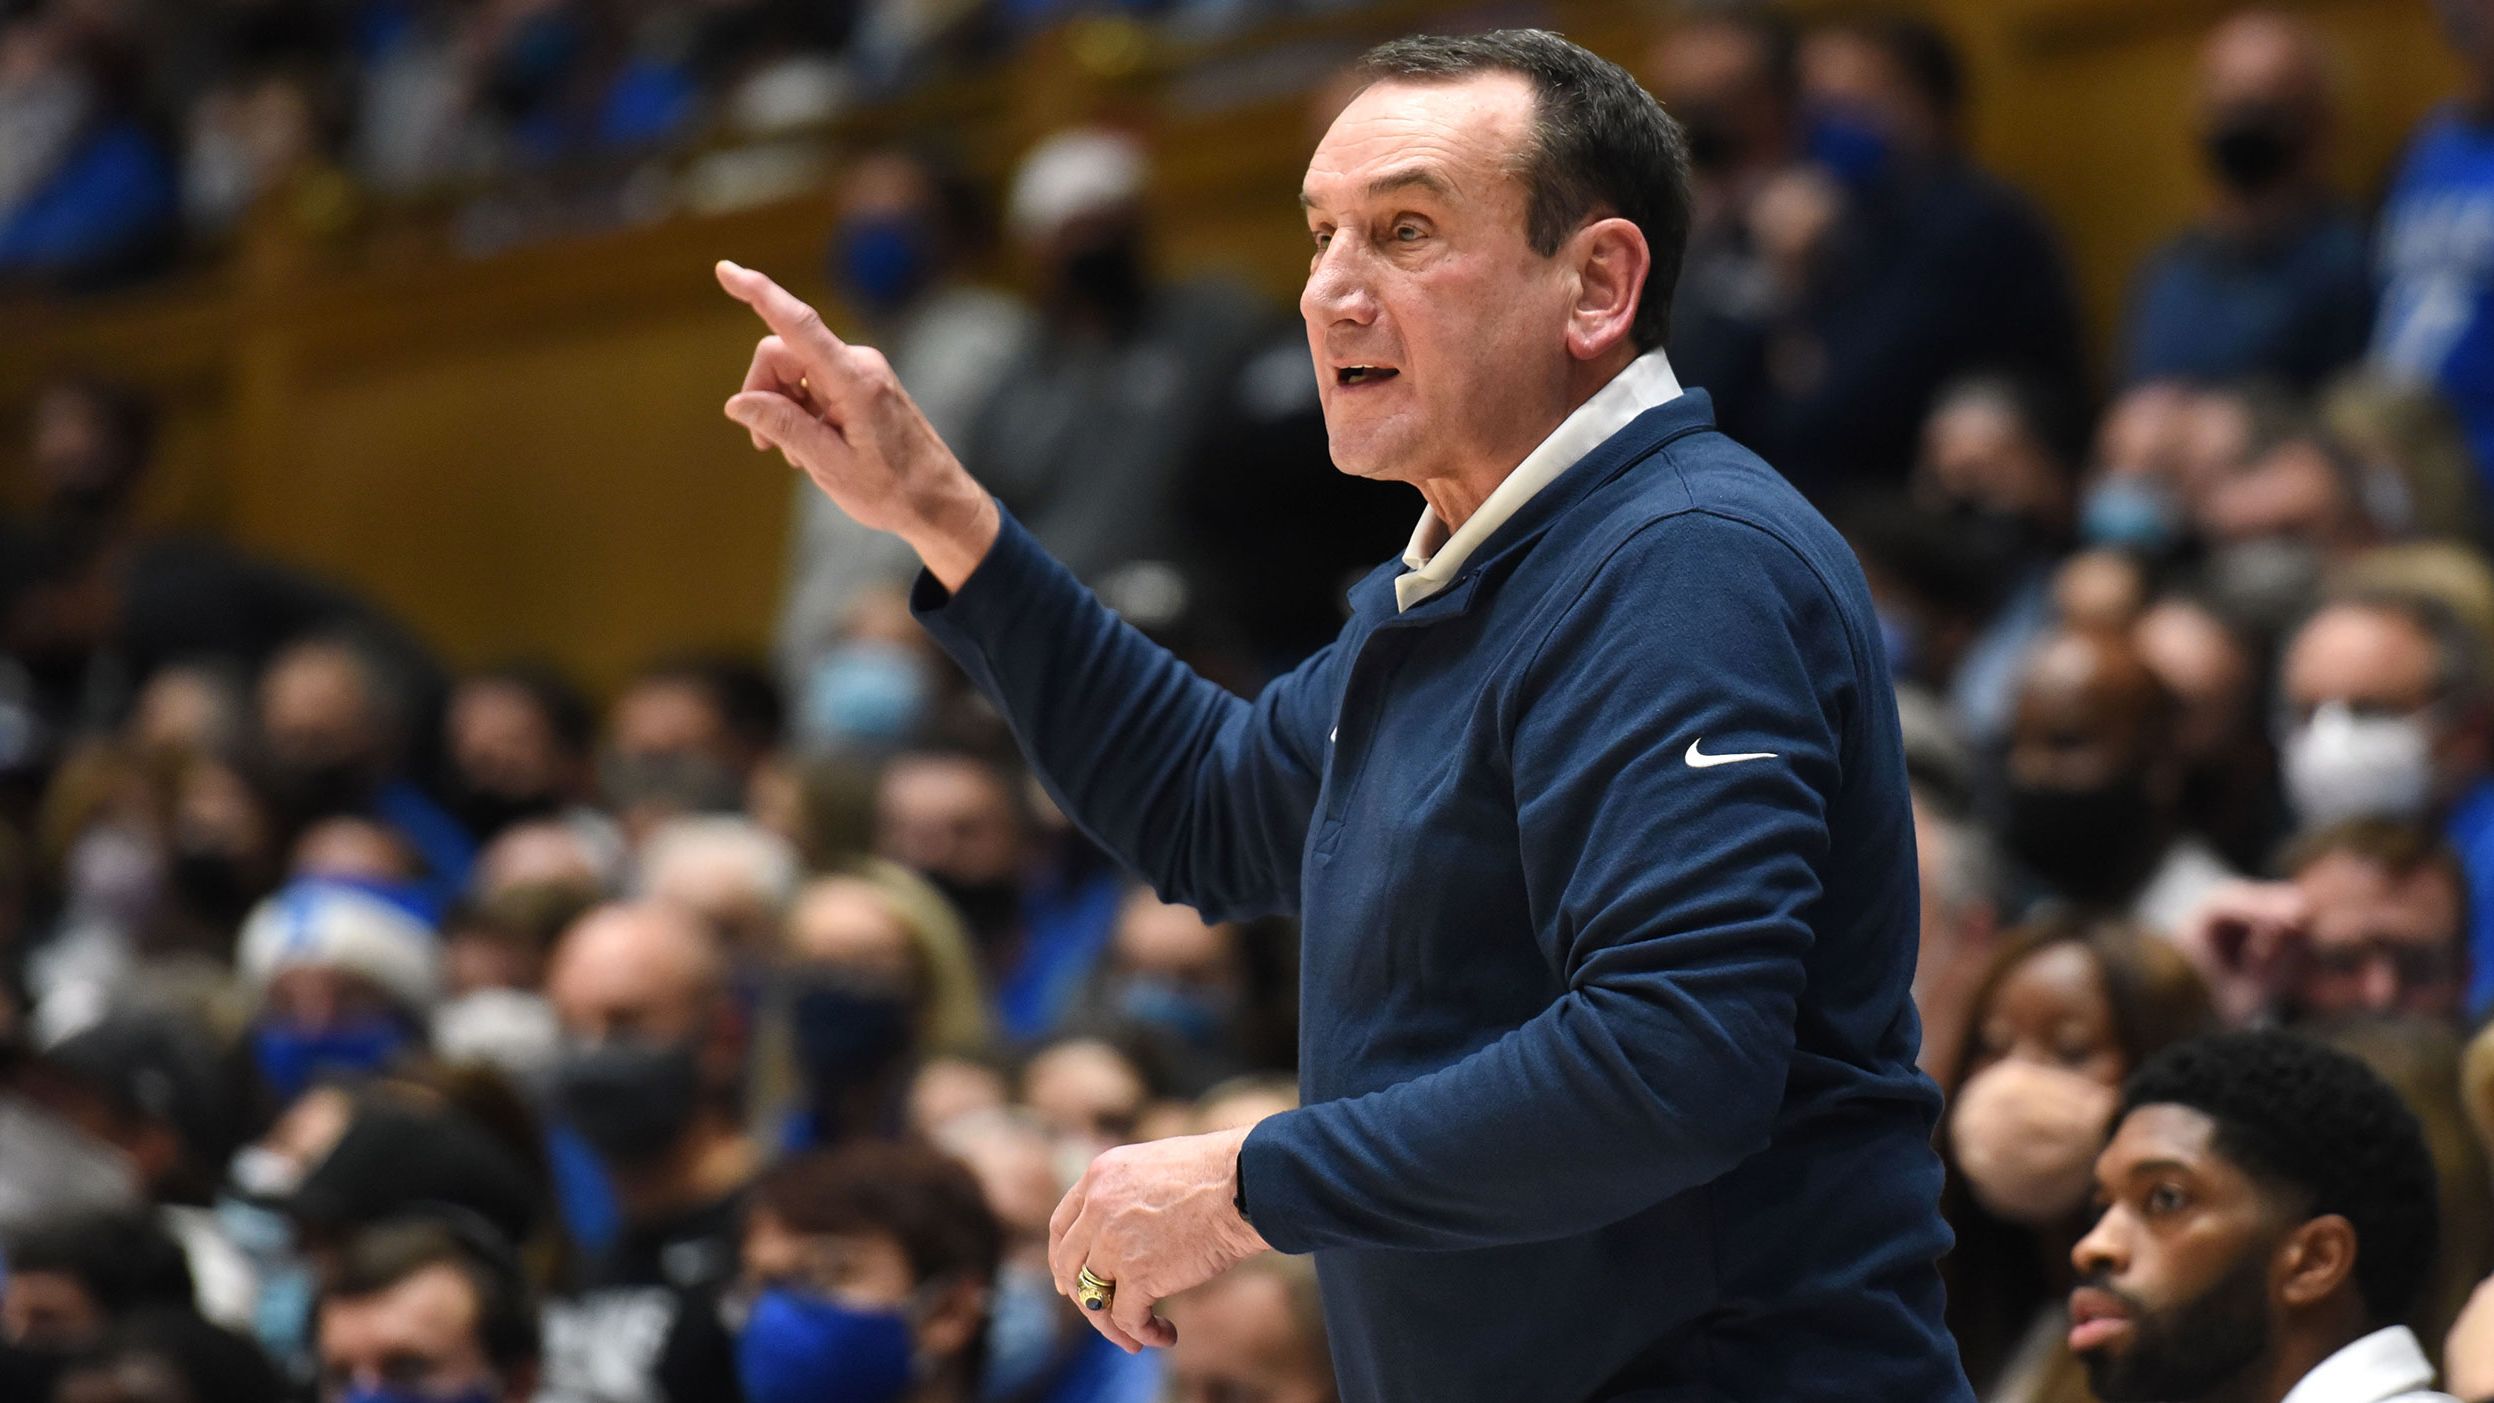 Duke Blue Devils head coach Mike Krzyzewski directs his team during a game against the Appalachian State Mountaineers on December 16, 2021.